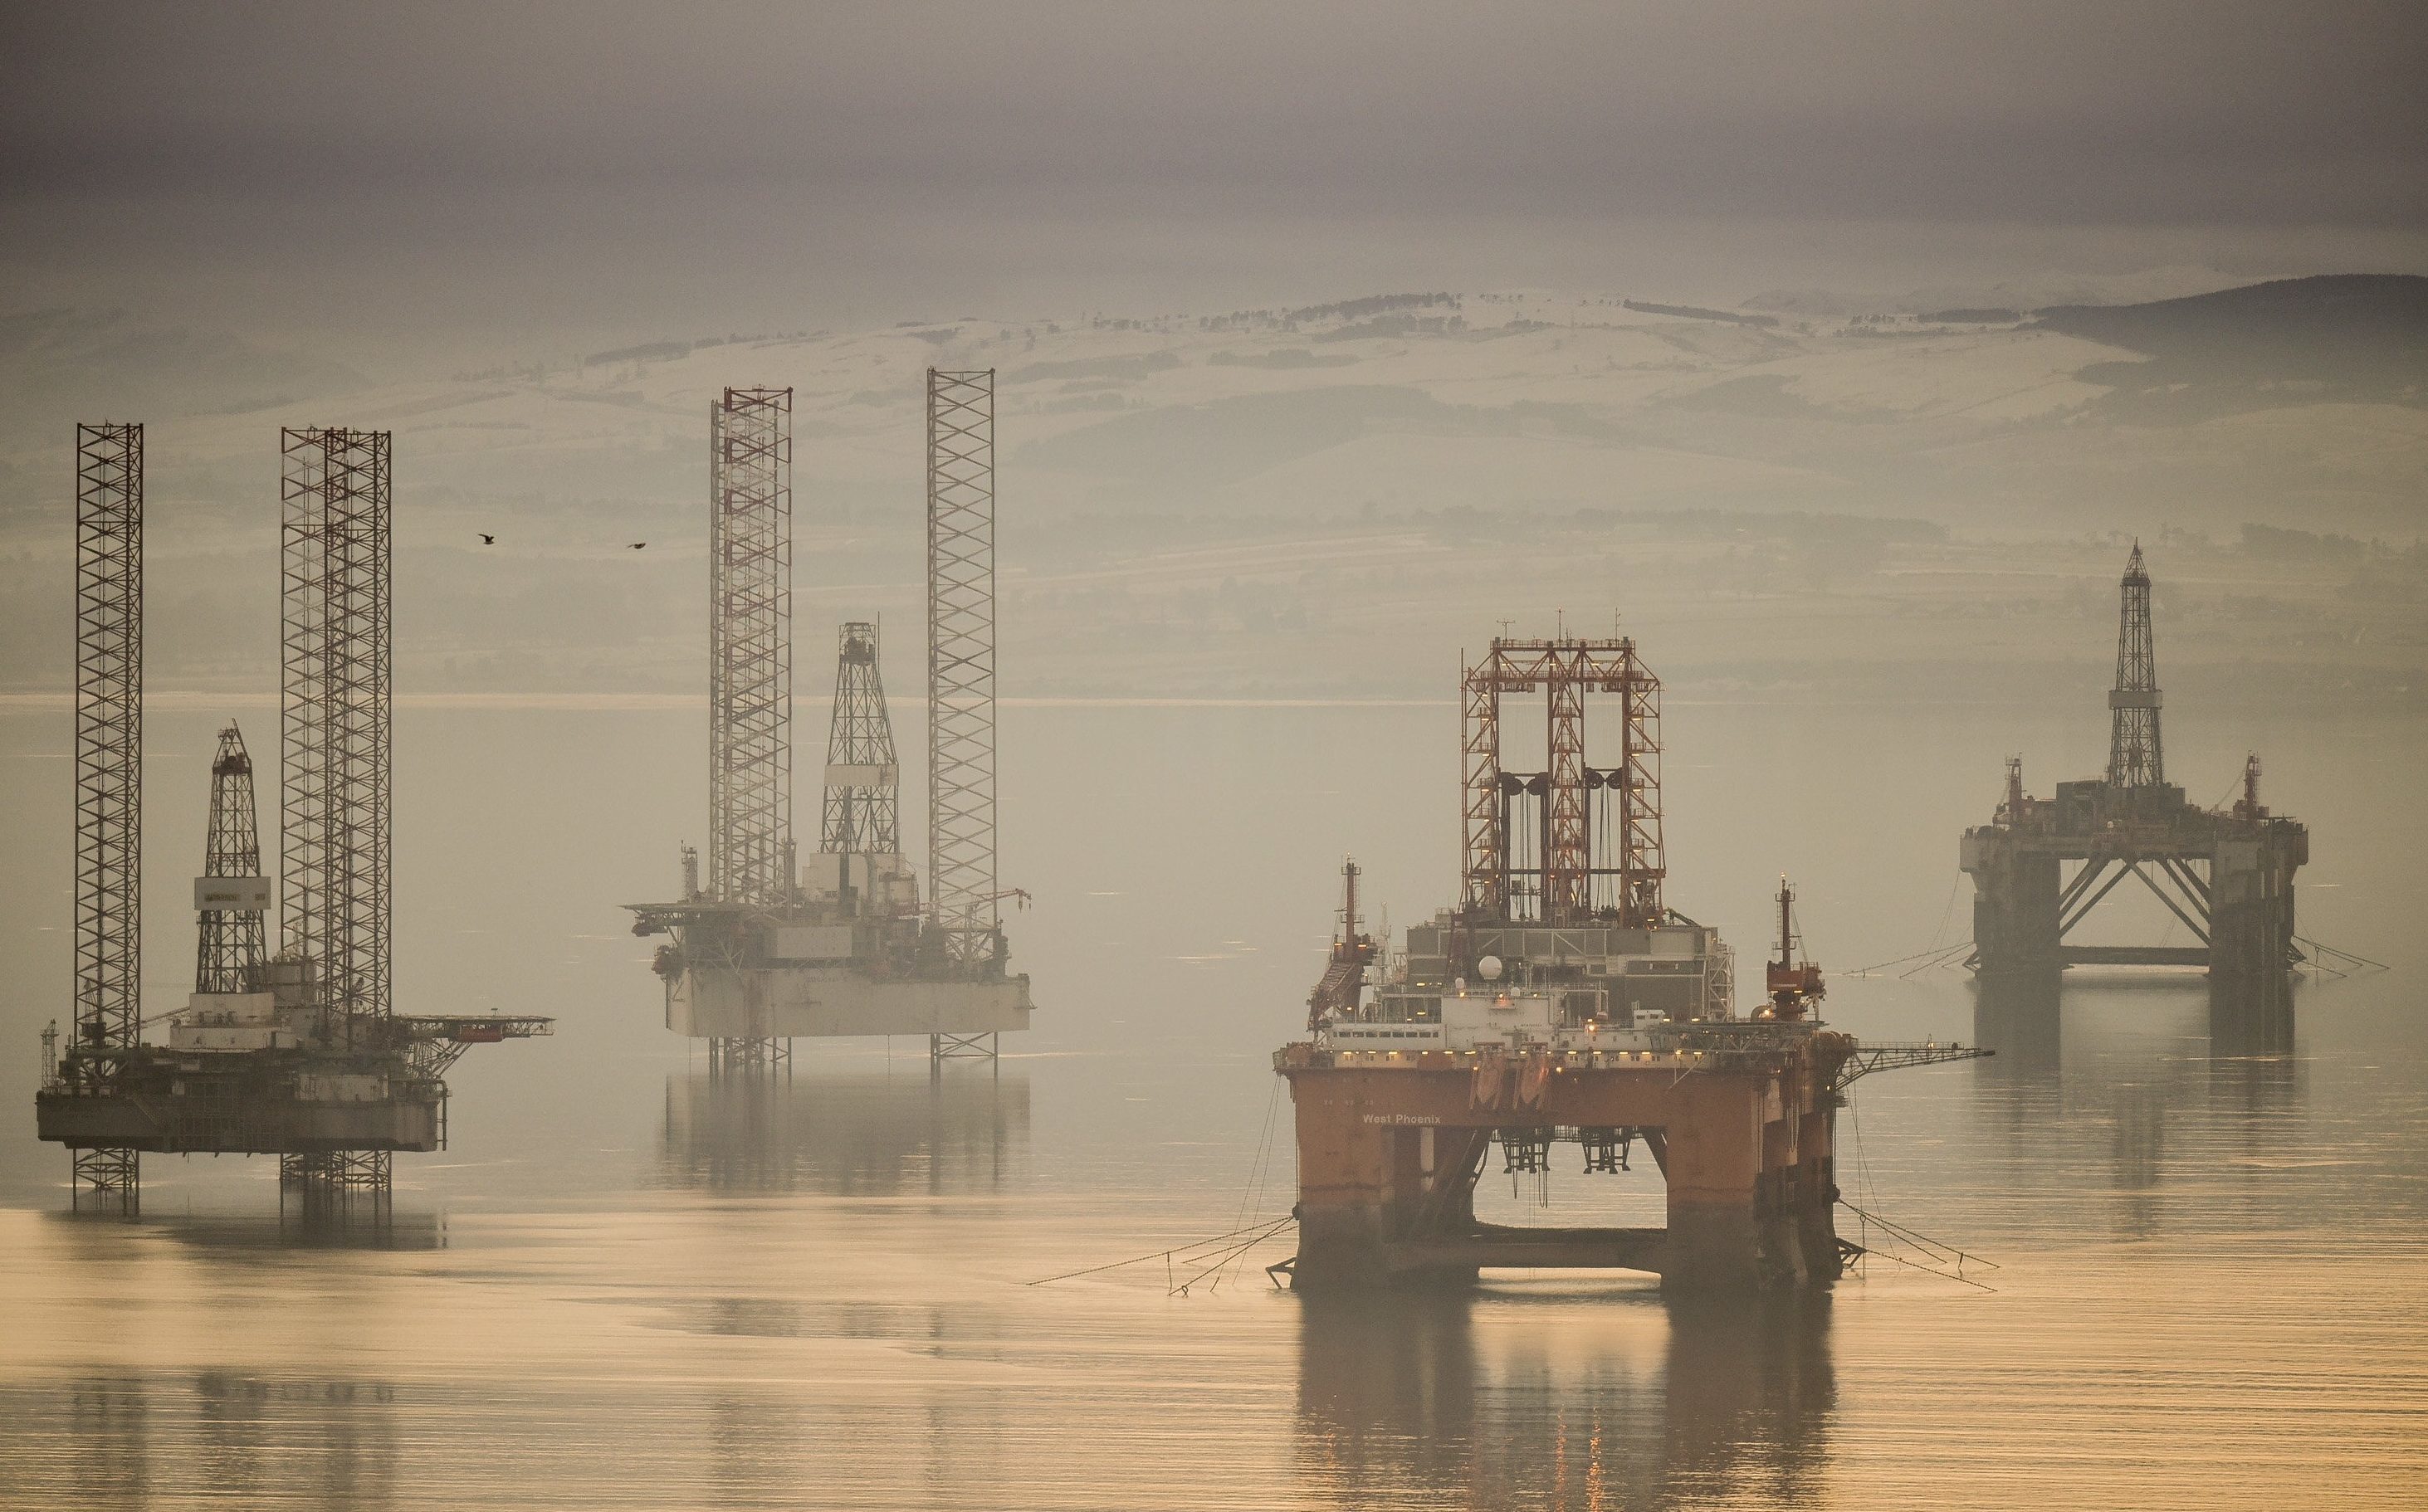 The oil rig graveyard in the Cromarty Firth near Invergordon, Highland.